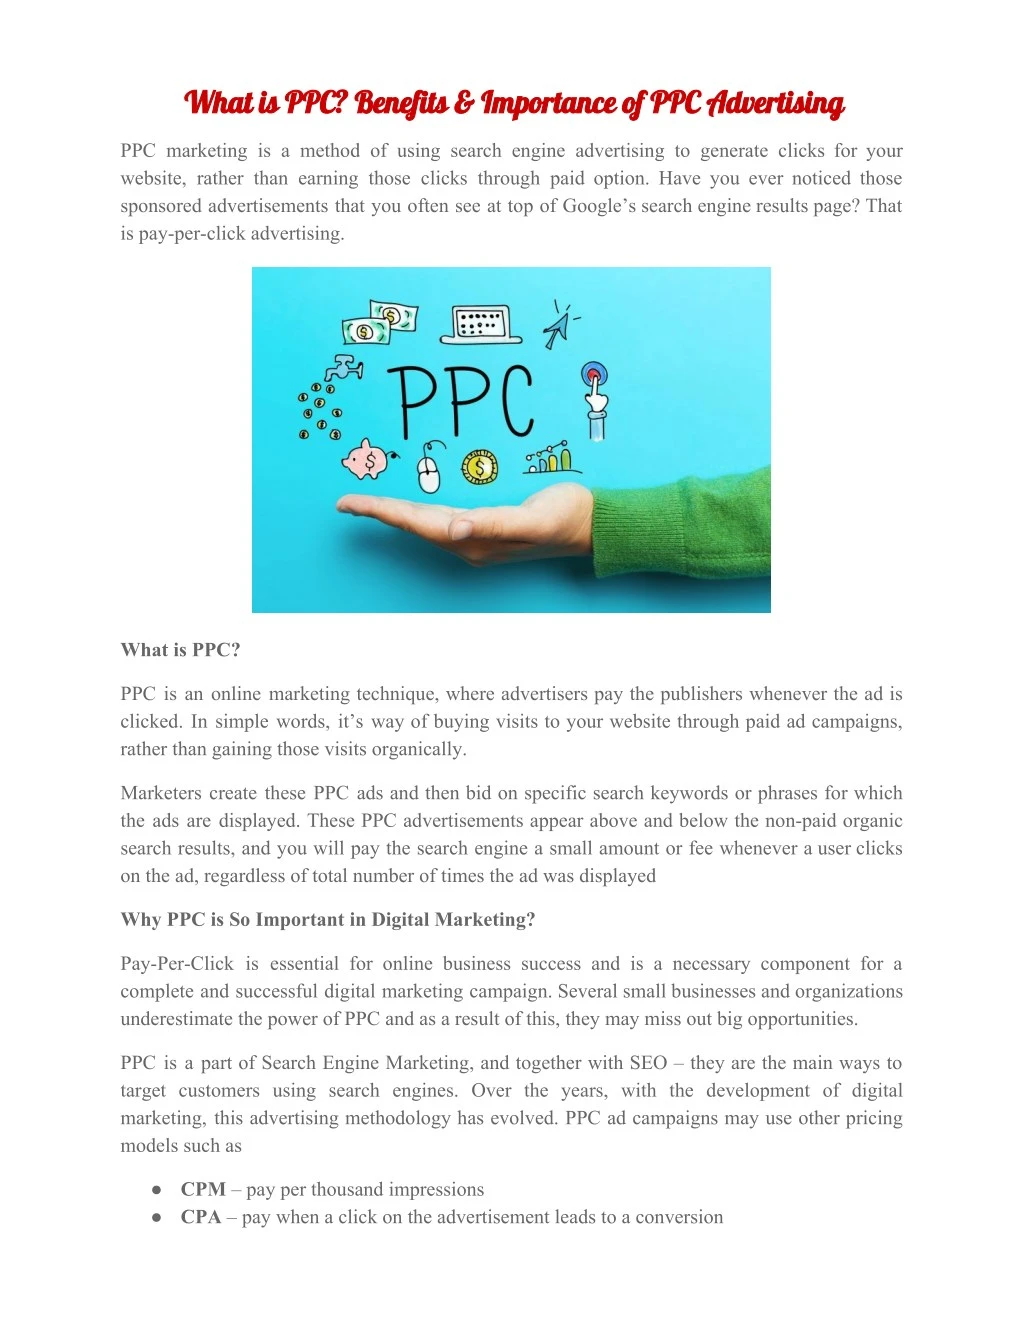 what is ppc benefits importance